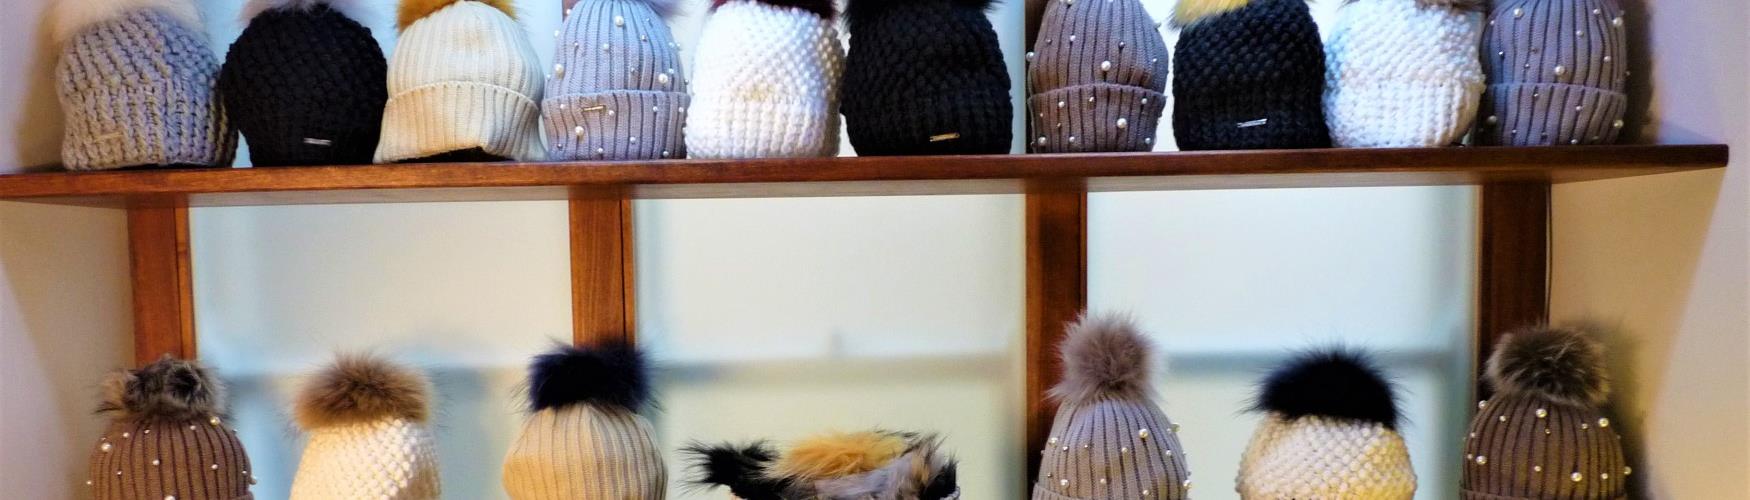 Woolly hats at Slate Clothing in Burford